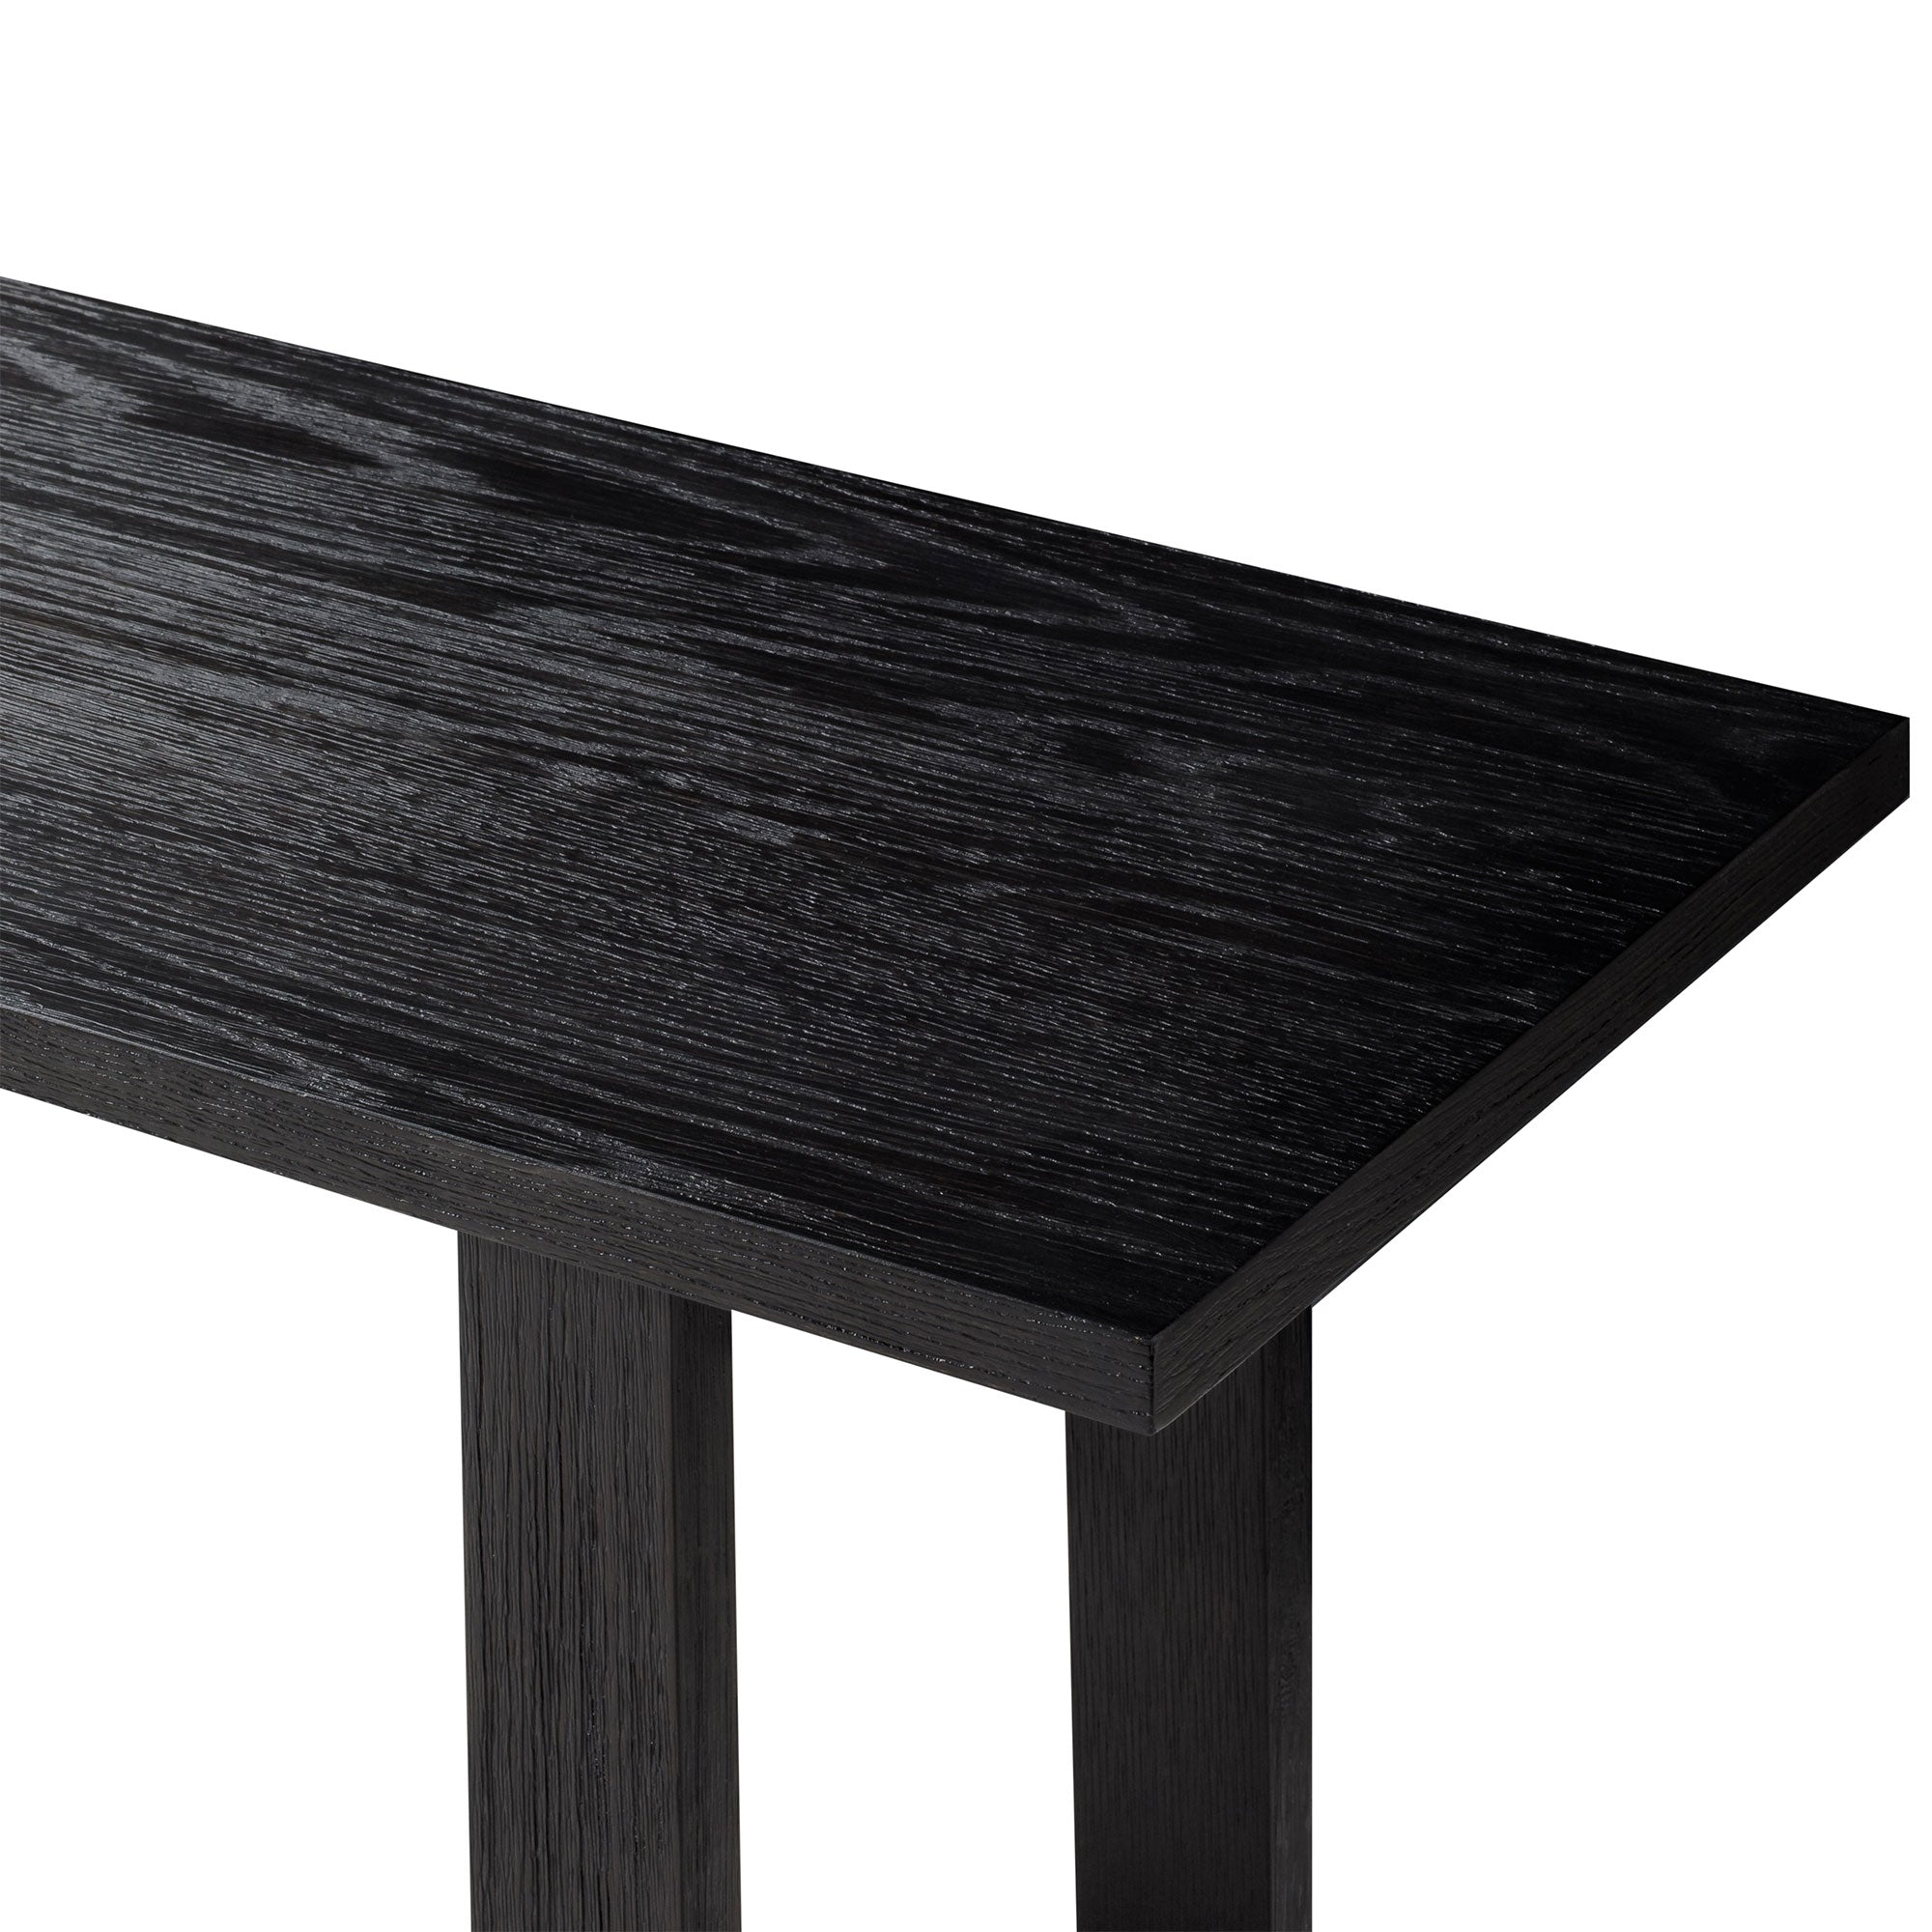 Hera Organic Wooden Console Table in Weathered Black Finish in Accent Tables by Maven Lane